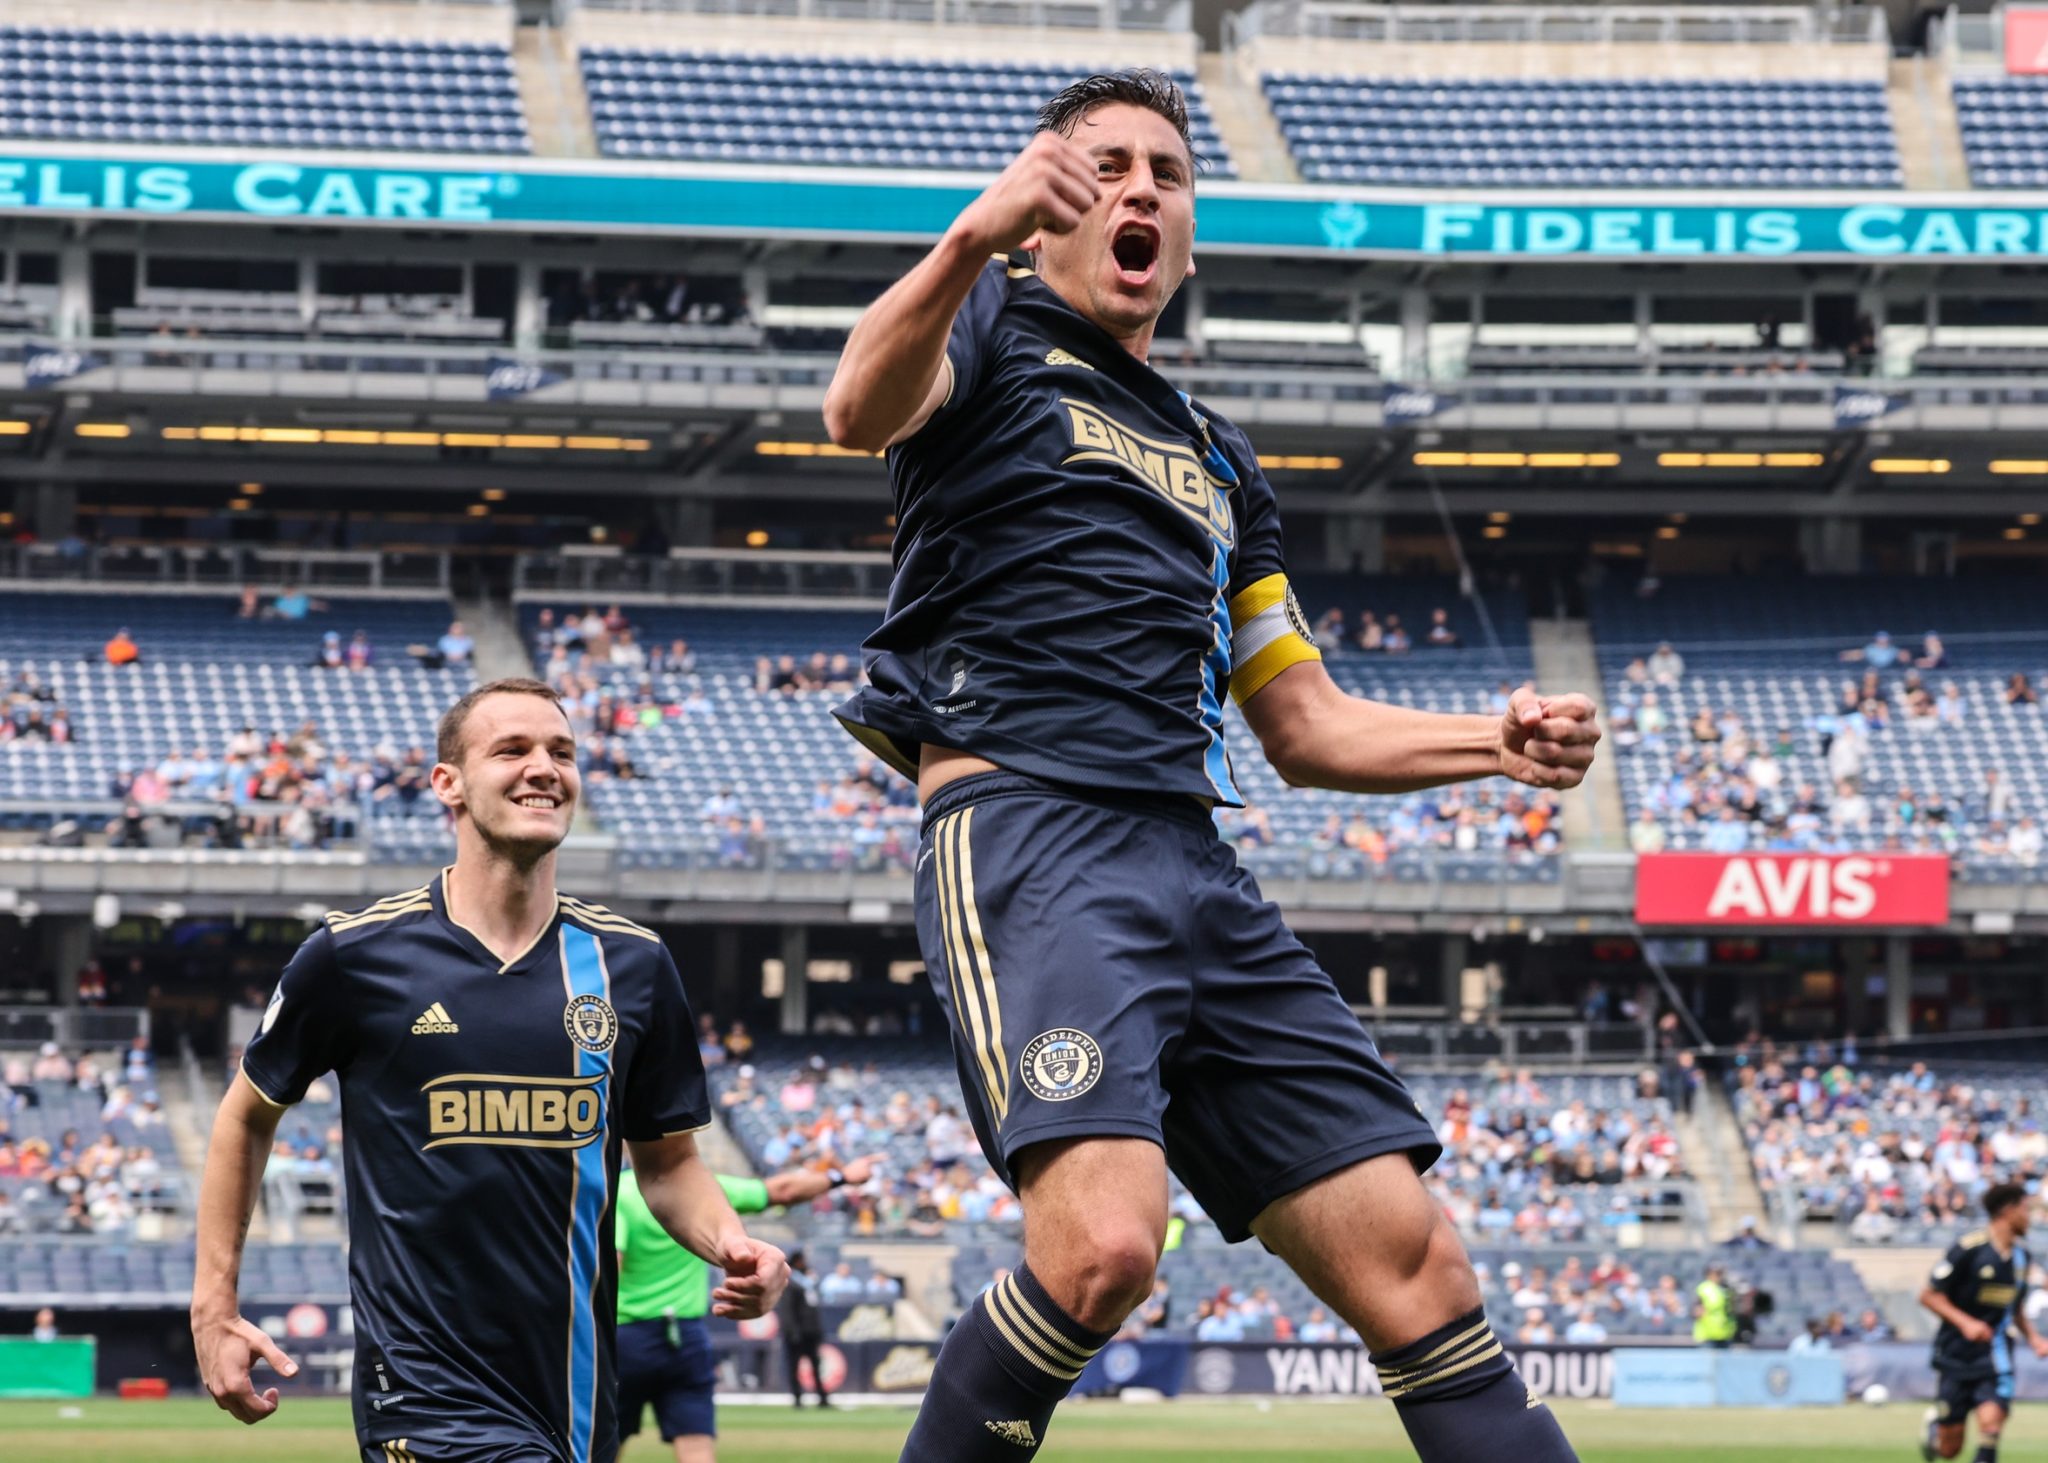 The First-Place Union are Playing Ferocious Defense and Telling Opponents to “Shut the F*** Up”